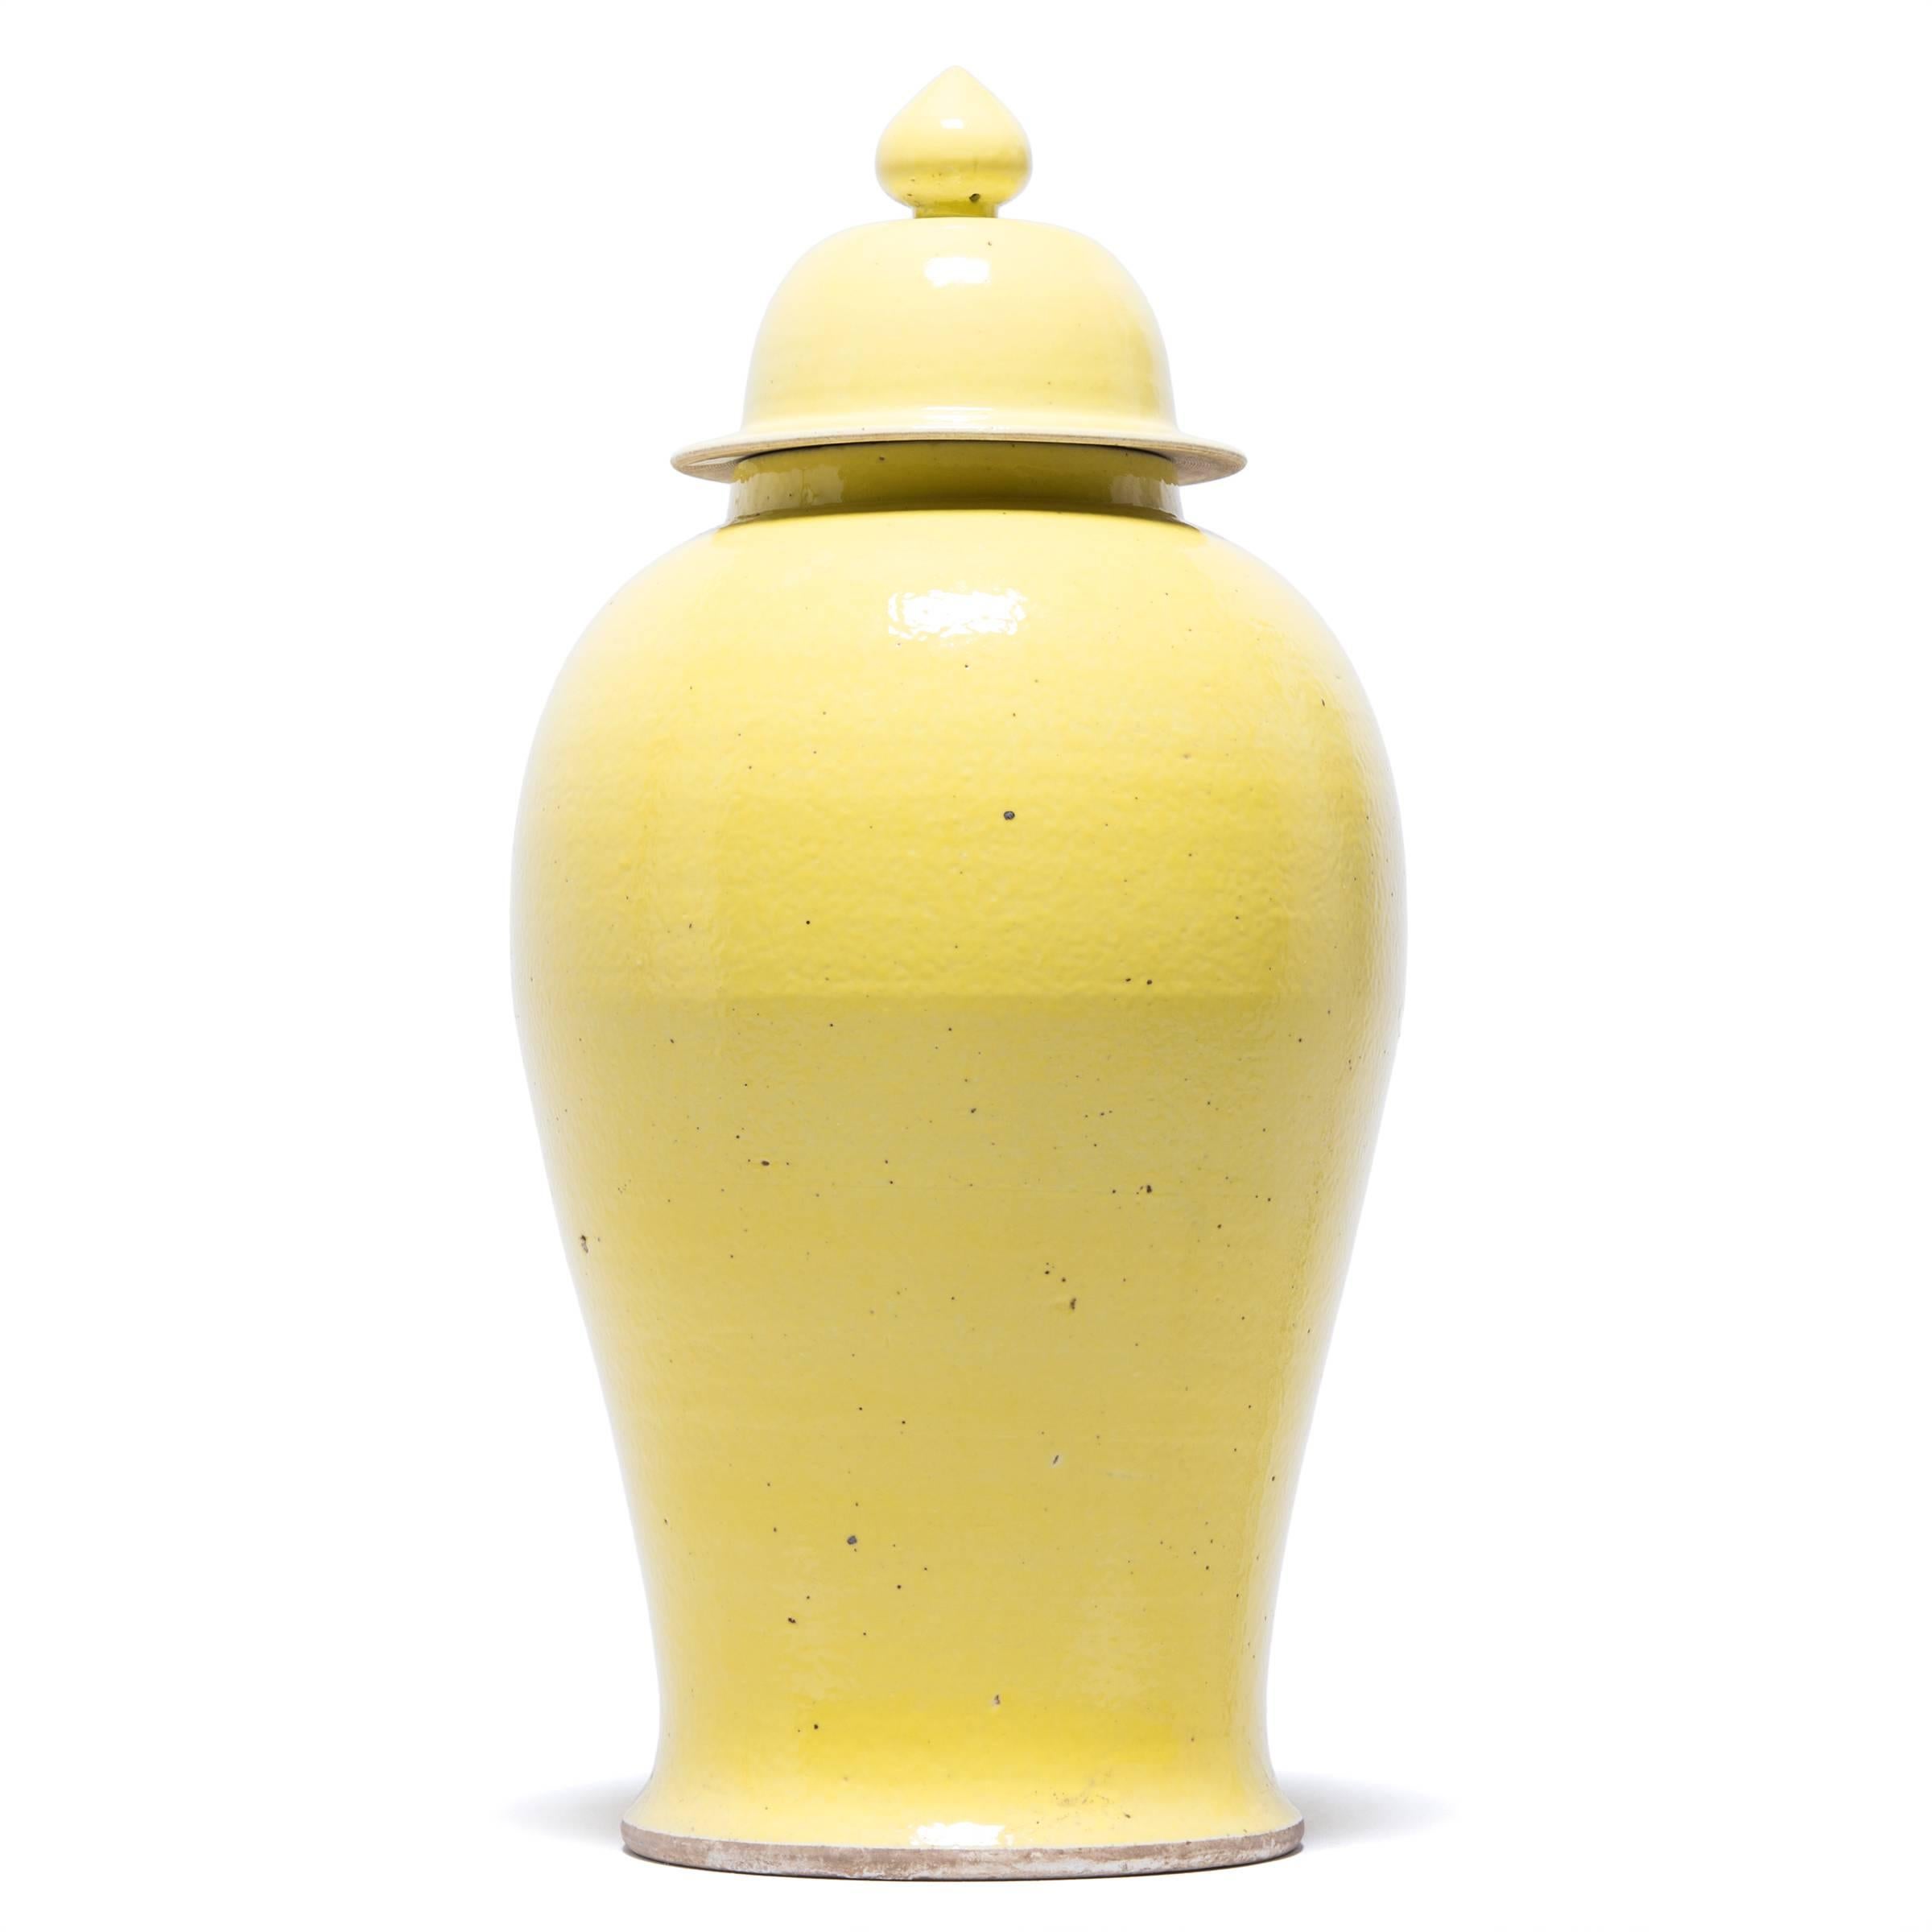 Defined by its rounded body, high shoulders, and domed lid, the time-honoured form of the Chinese baluster jar is given new life in this contemporary interpretation. Traditionally elaborately decorated, this modern take is cloaked in a layer of